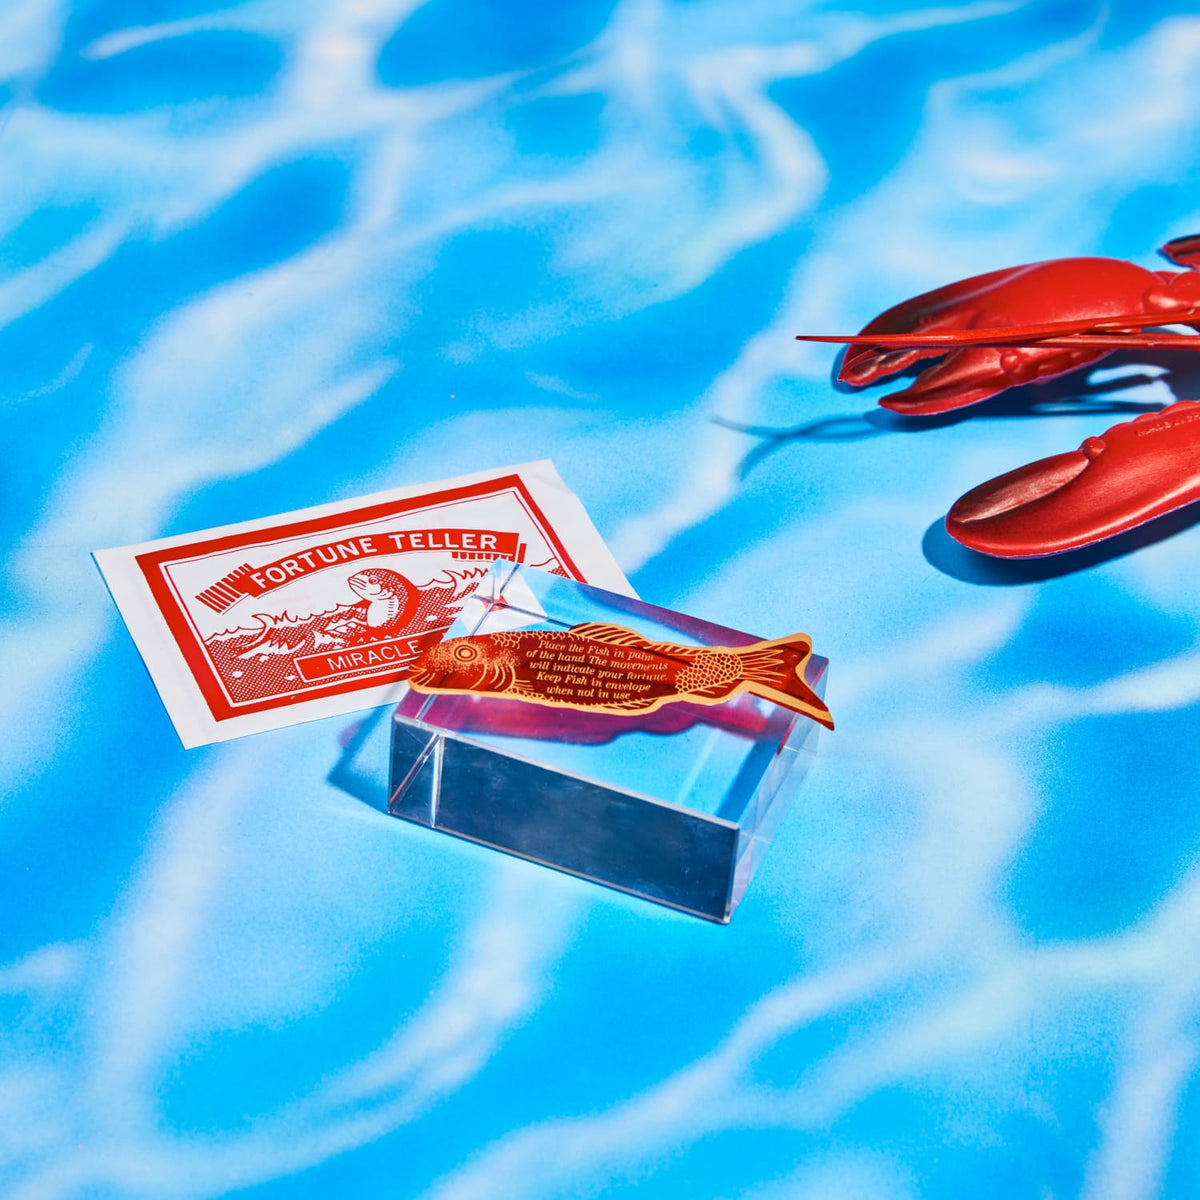 Fortune Fish Baby - Bff - Bff/boo - Dadday - Fortune